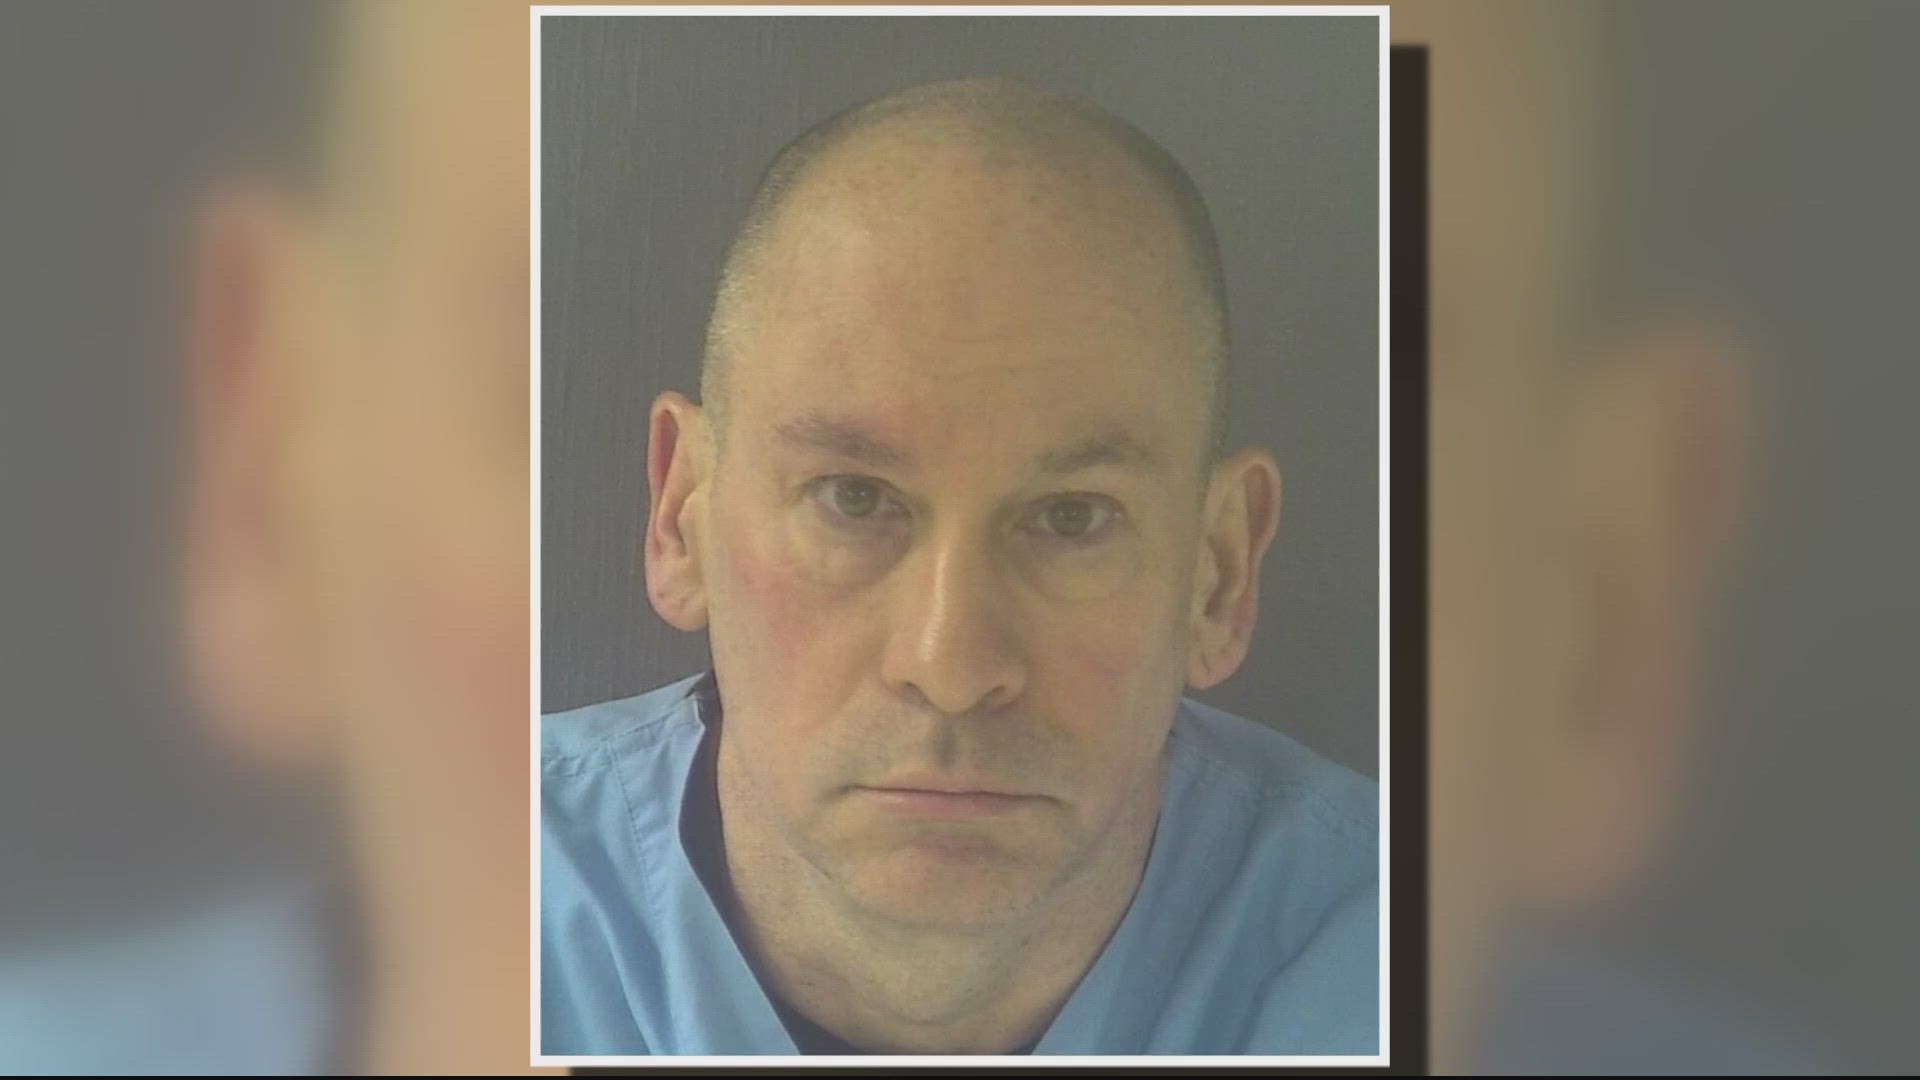 A North Carolina nurse practitioner is facing charges after allegedly inappropriately touching patients, one of which was a child, at a Spotsylvania medical clinic.